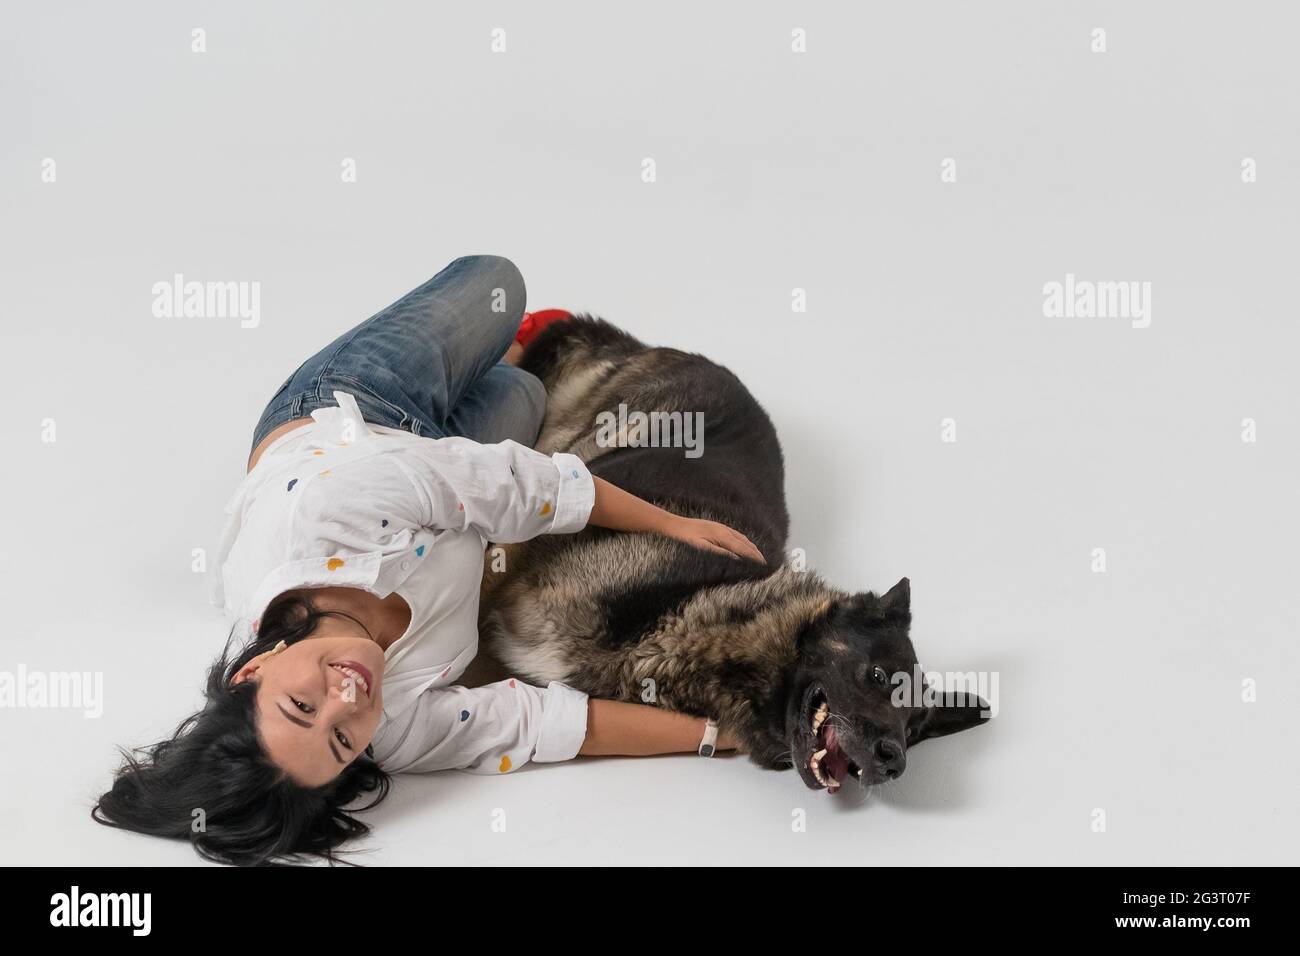 Pretty dark long hair smiling woman with dog in photo studio. Stock Photo